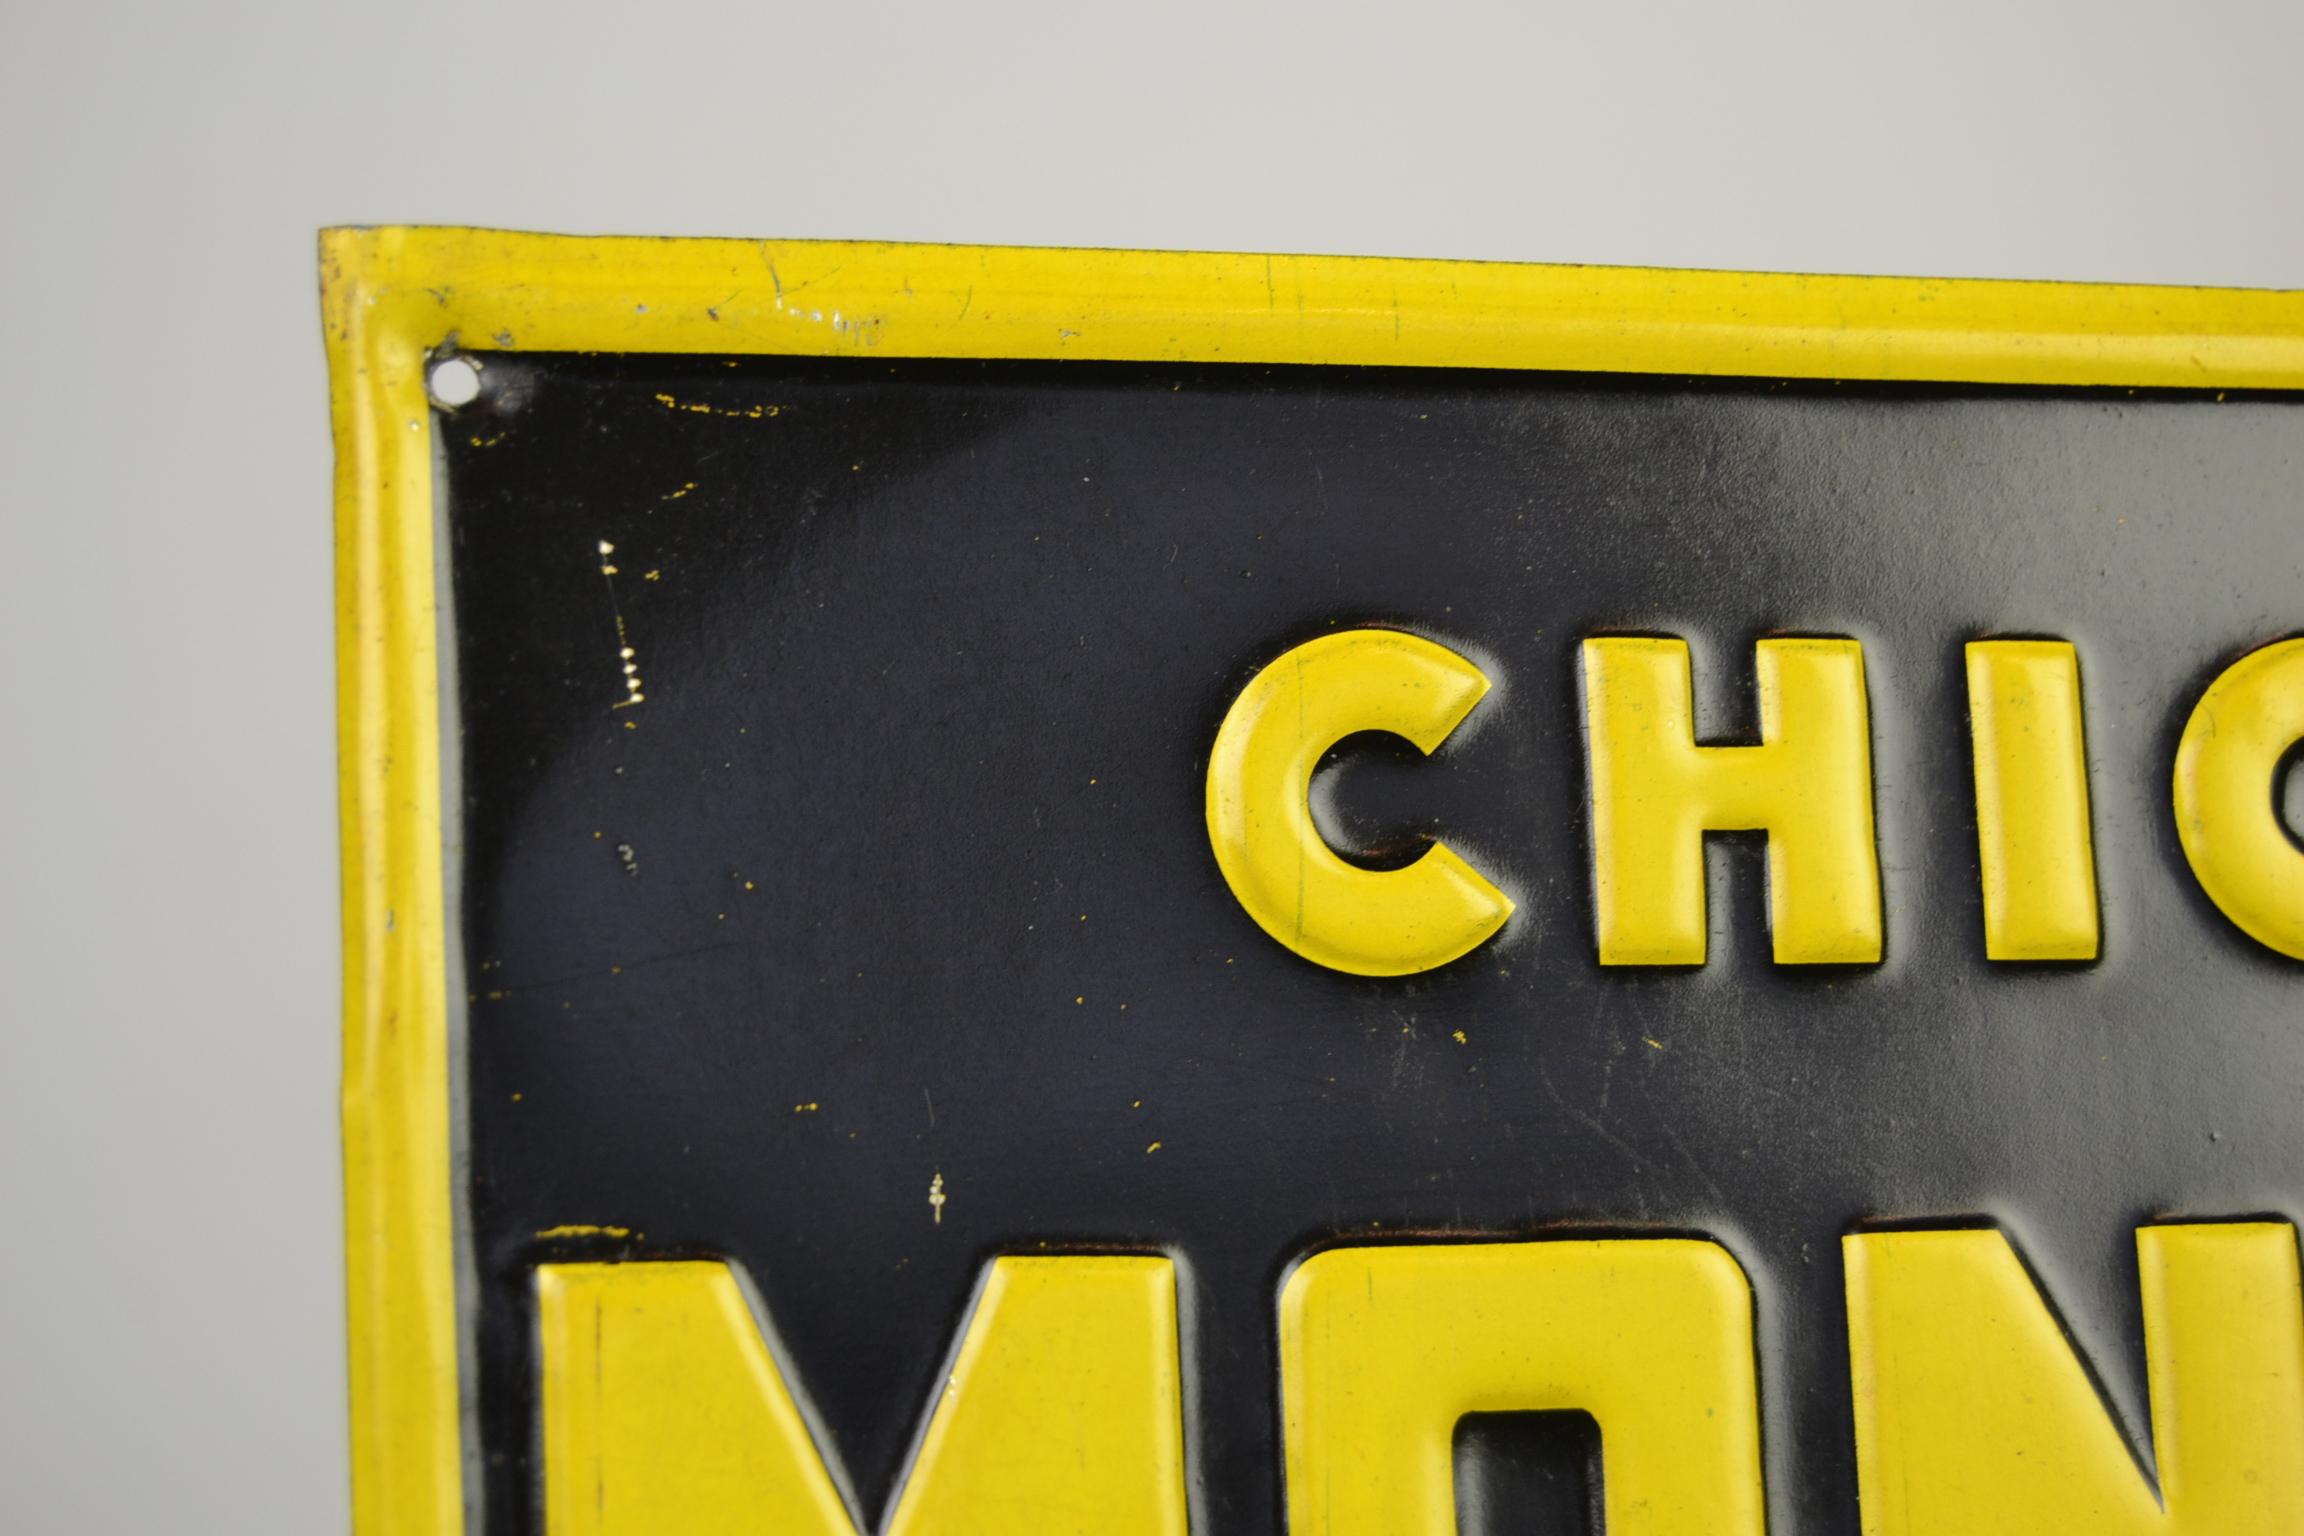 Vintage black and yellow tin publicity shop display - metal advertising sign
 for Chicorée Mondiale. This Art Deco Sign is dated 1927.
The Letters are pressed into the metal, what gives relief to the sign. 
This Sign - license plate sized - was